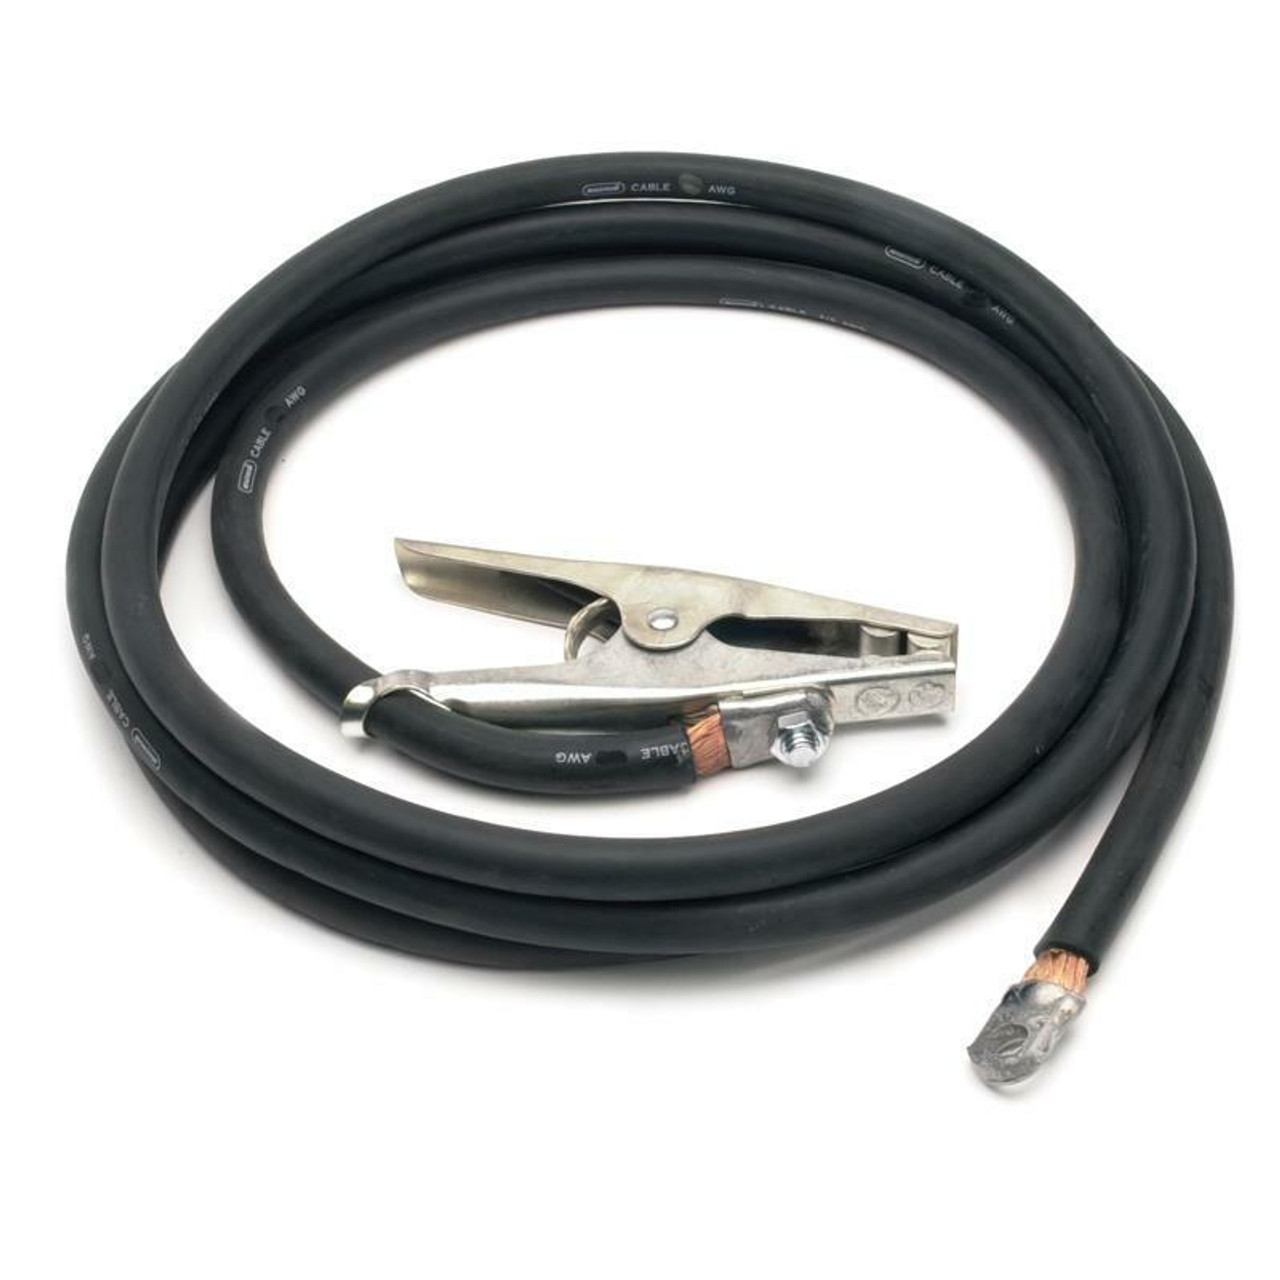 100 Foot 2/0 Welding Cable Lead with Ground Clamp & Lug